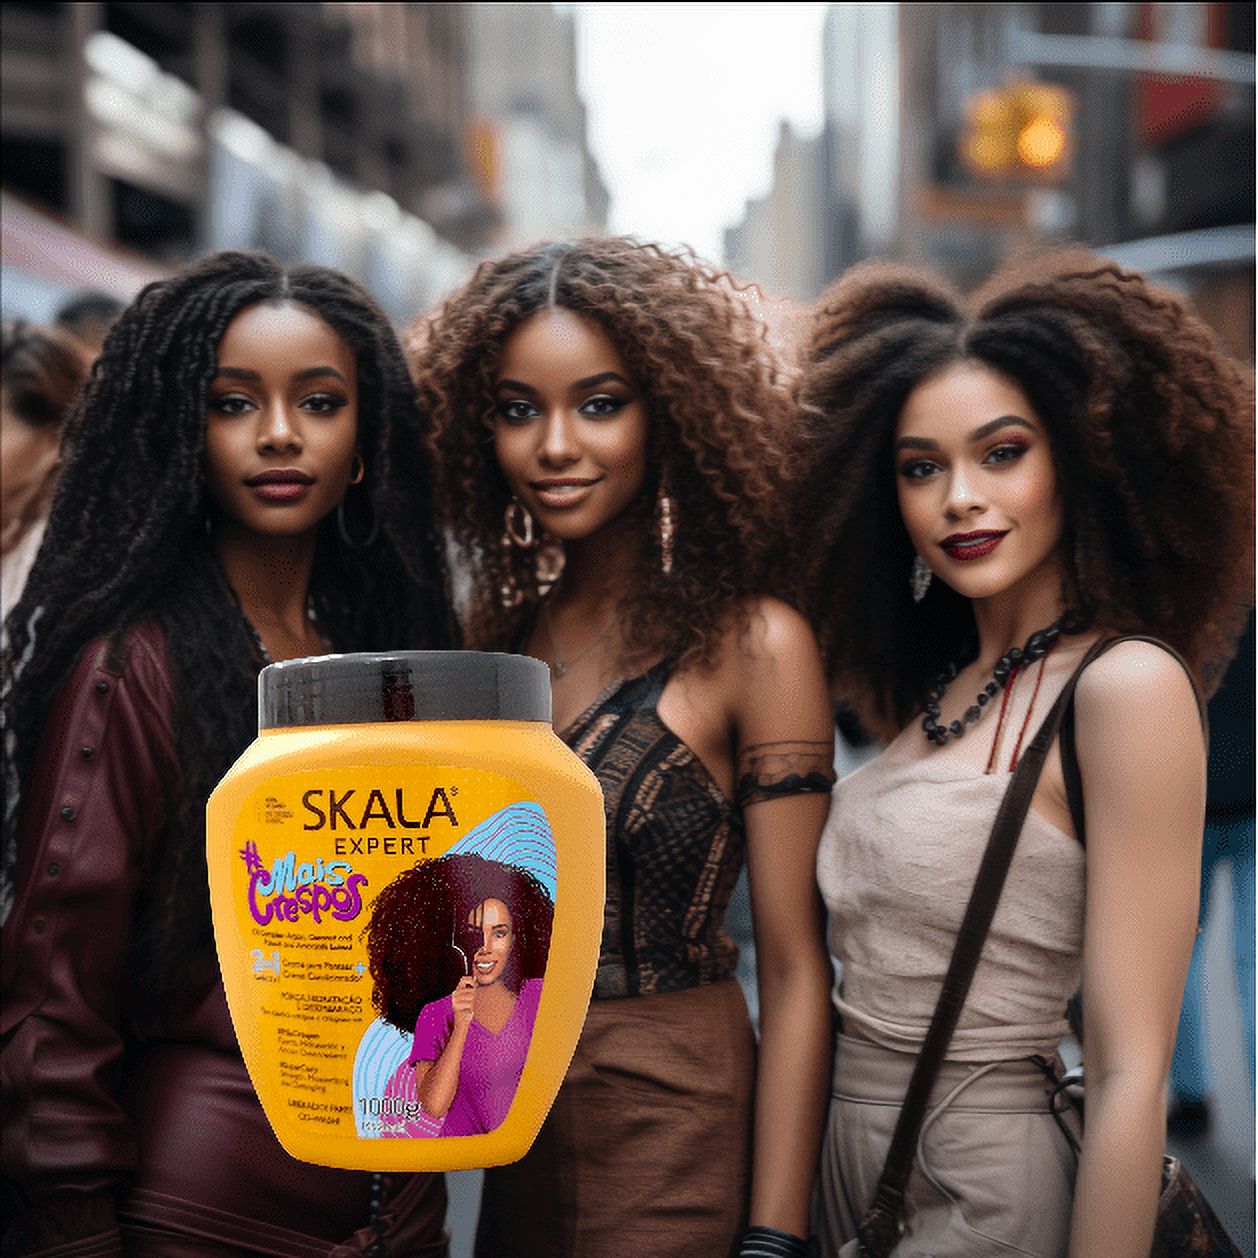 Skala Expert Mais Crespos Hair Treatment for Curly and Afro Hair: Perfect and Defined curls,Hydration and Softness in a Single Product - image 2 of 9